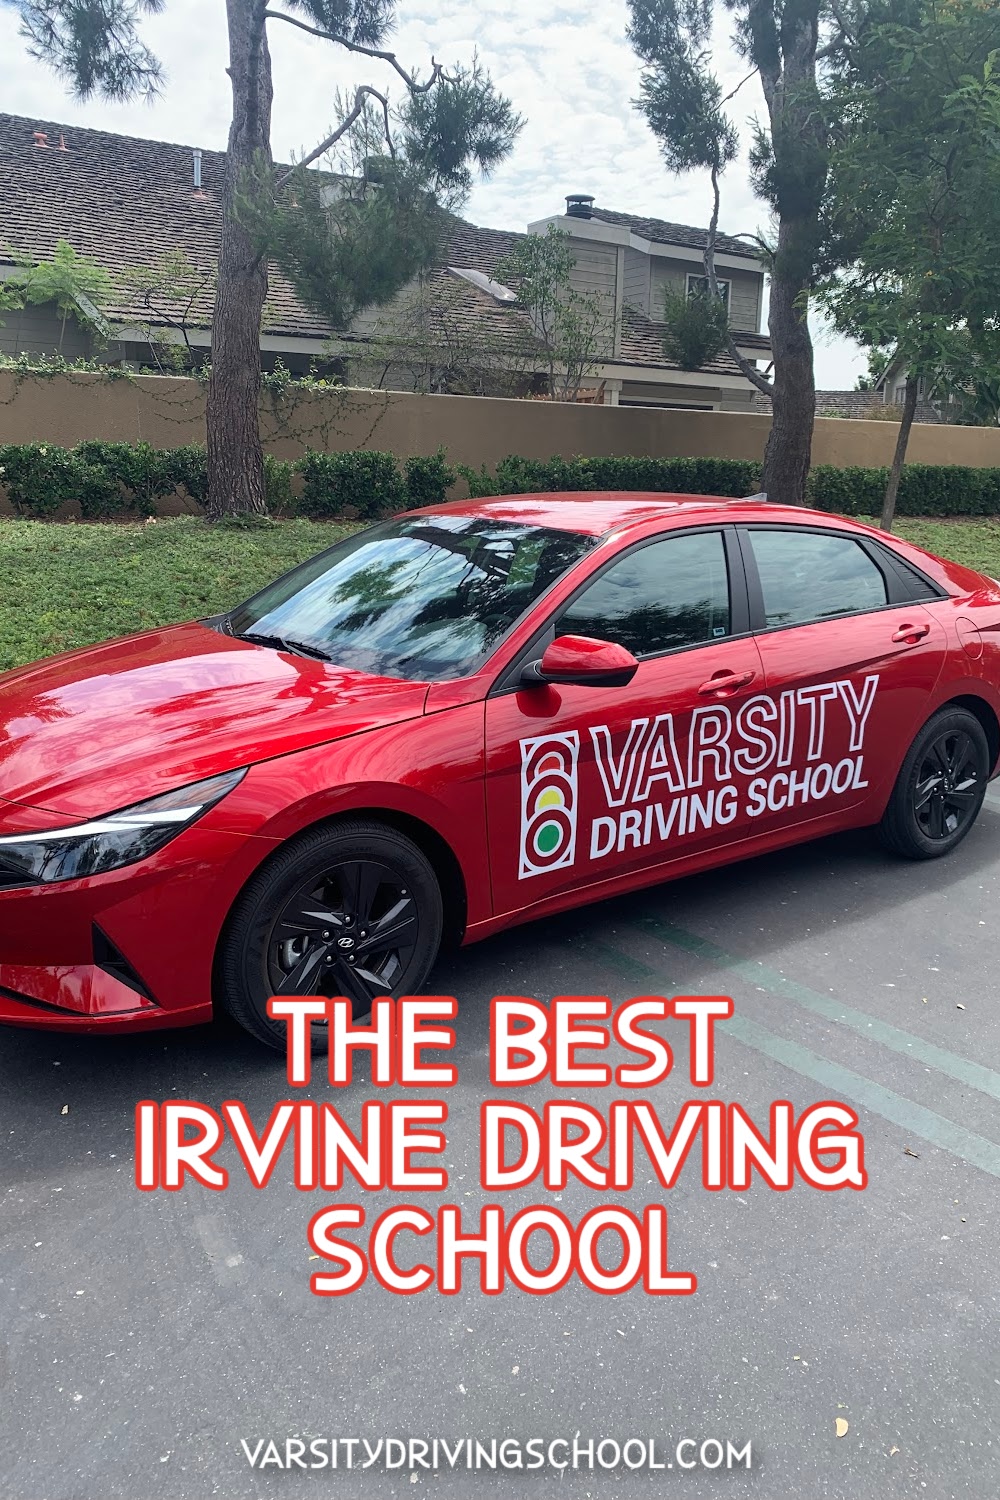 The best Irvine driving school is Varsity Driving School where students can oversee their own schedules and get the best Irvine drivers ed.